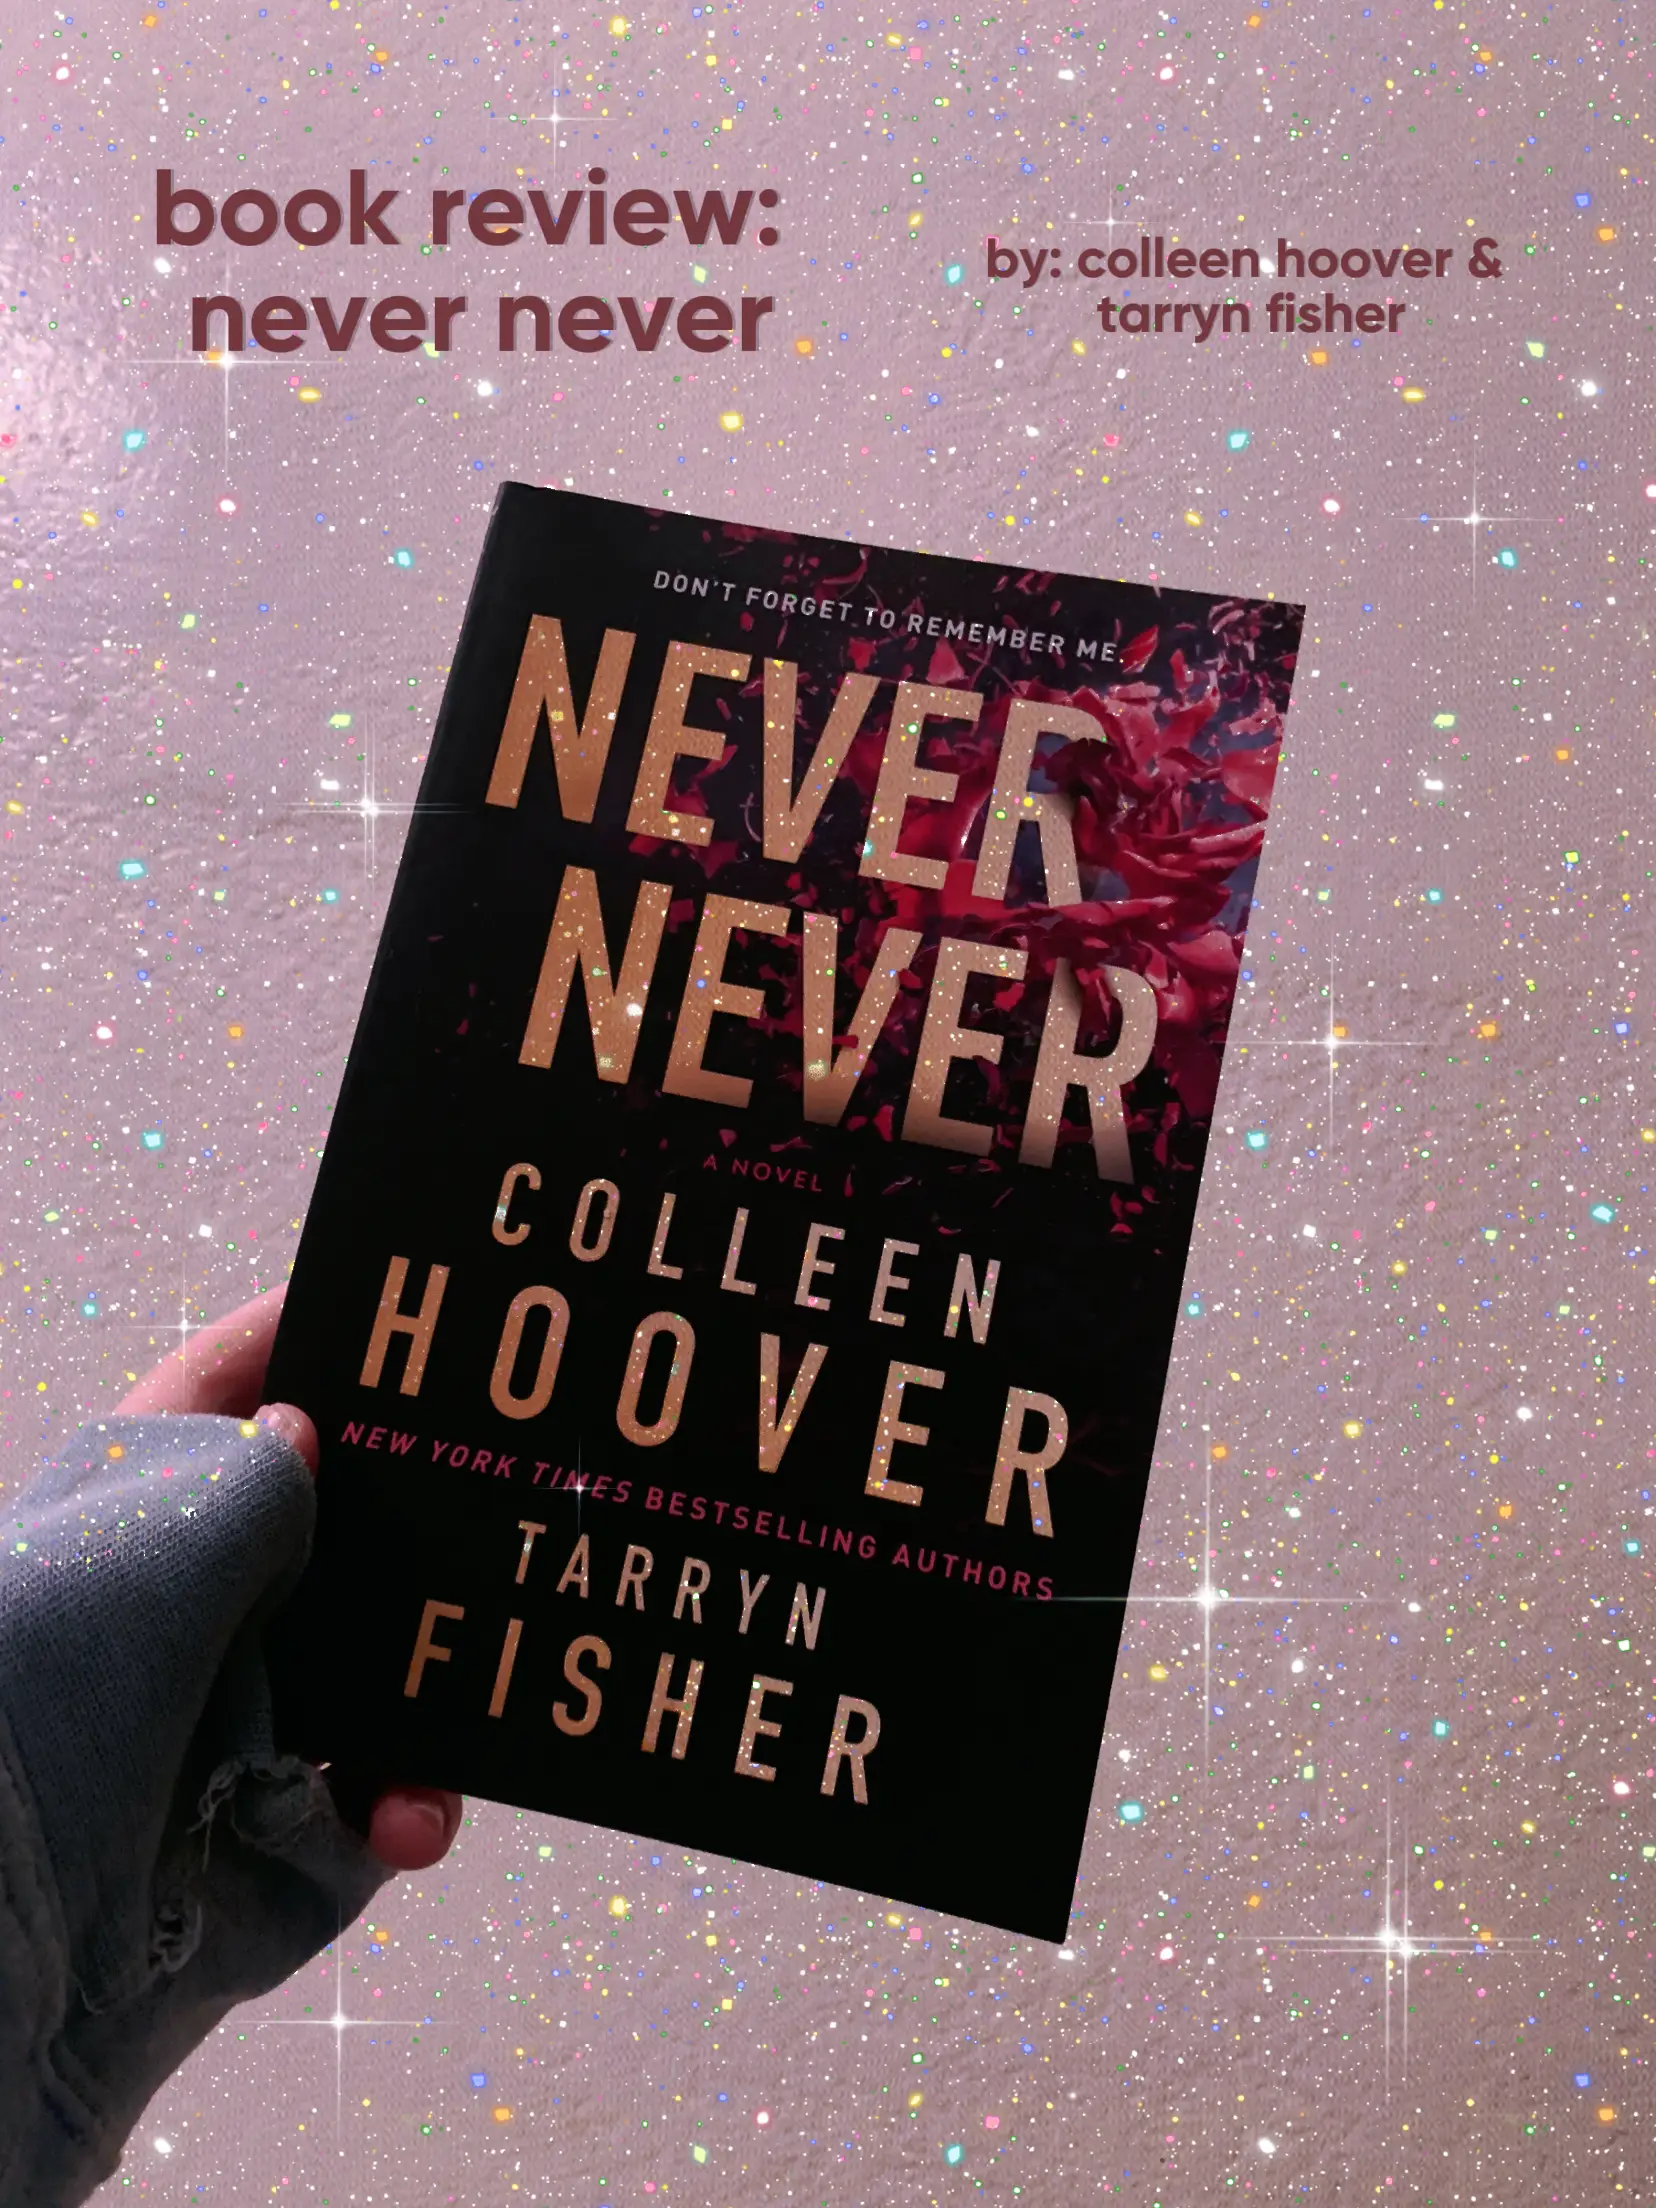 Colleen Hoover - Never never